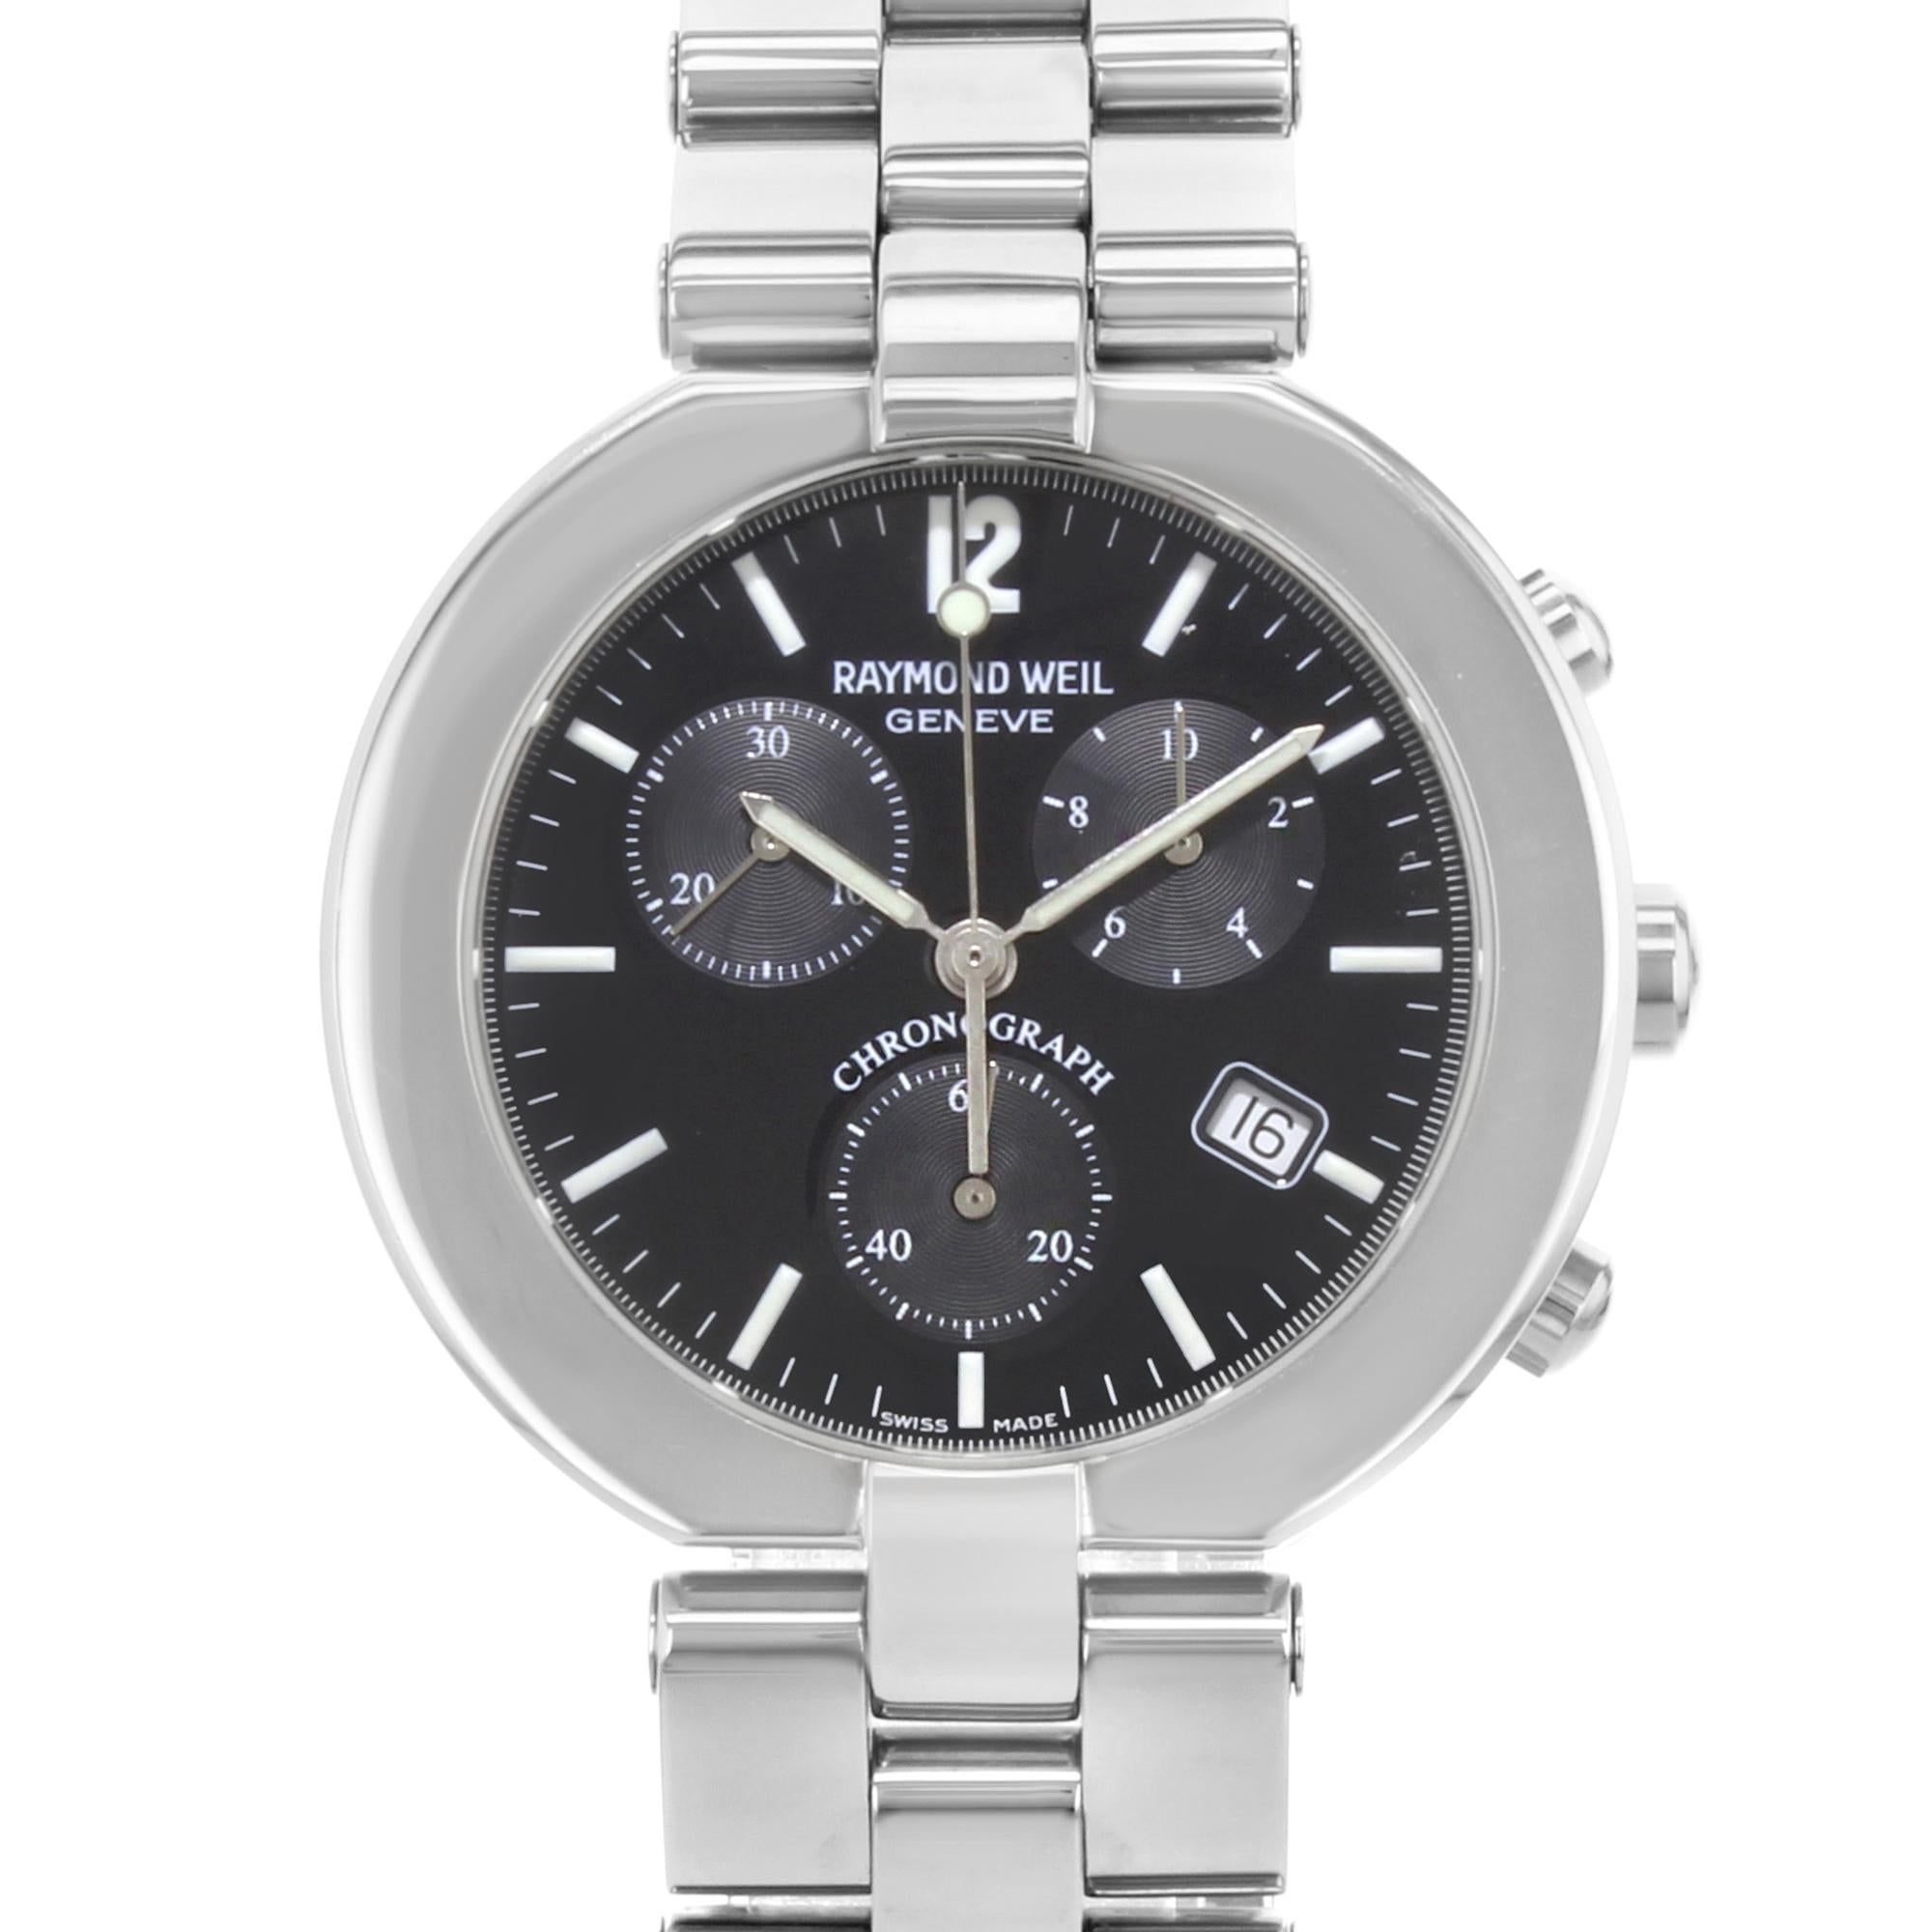 This New With Defects Raymond Weil Allegro 4817S-BK is a beautiful men's timepiece that is powered by a quartz movement which is cased in a stainless steel case. It has a round shape face, chronograph, date, small seconds subdial dial and has hand